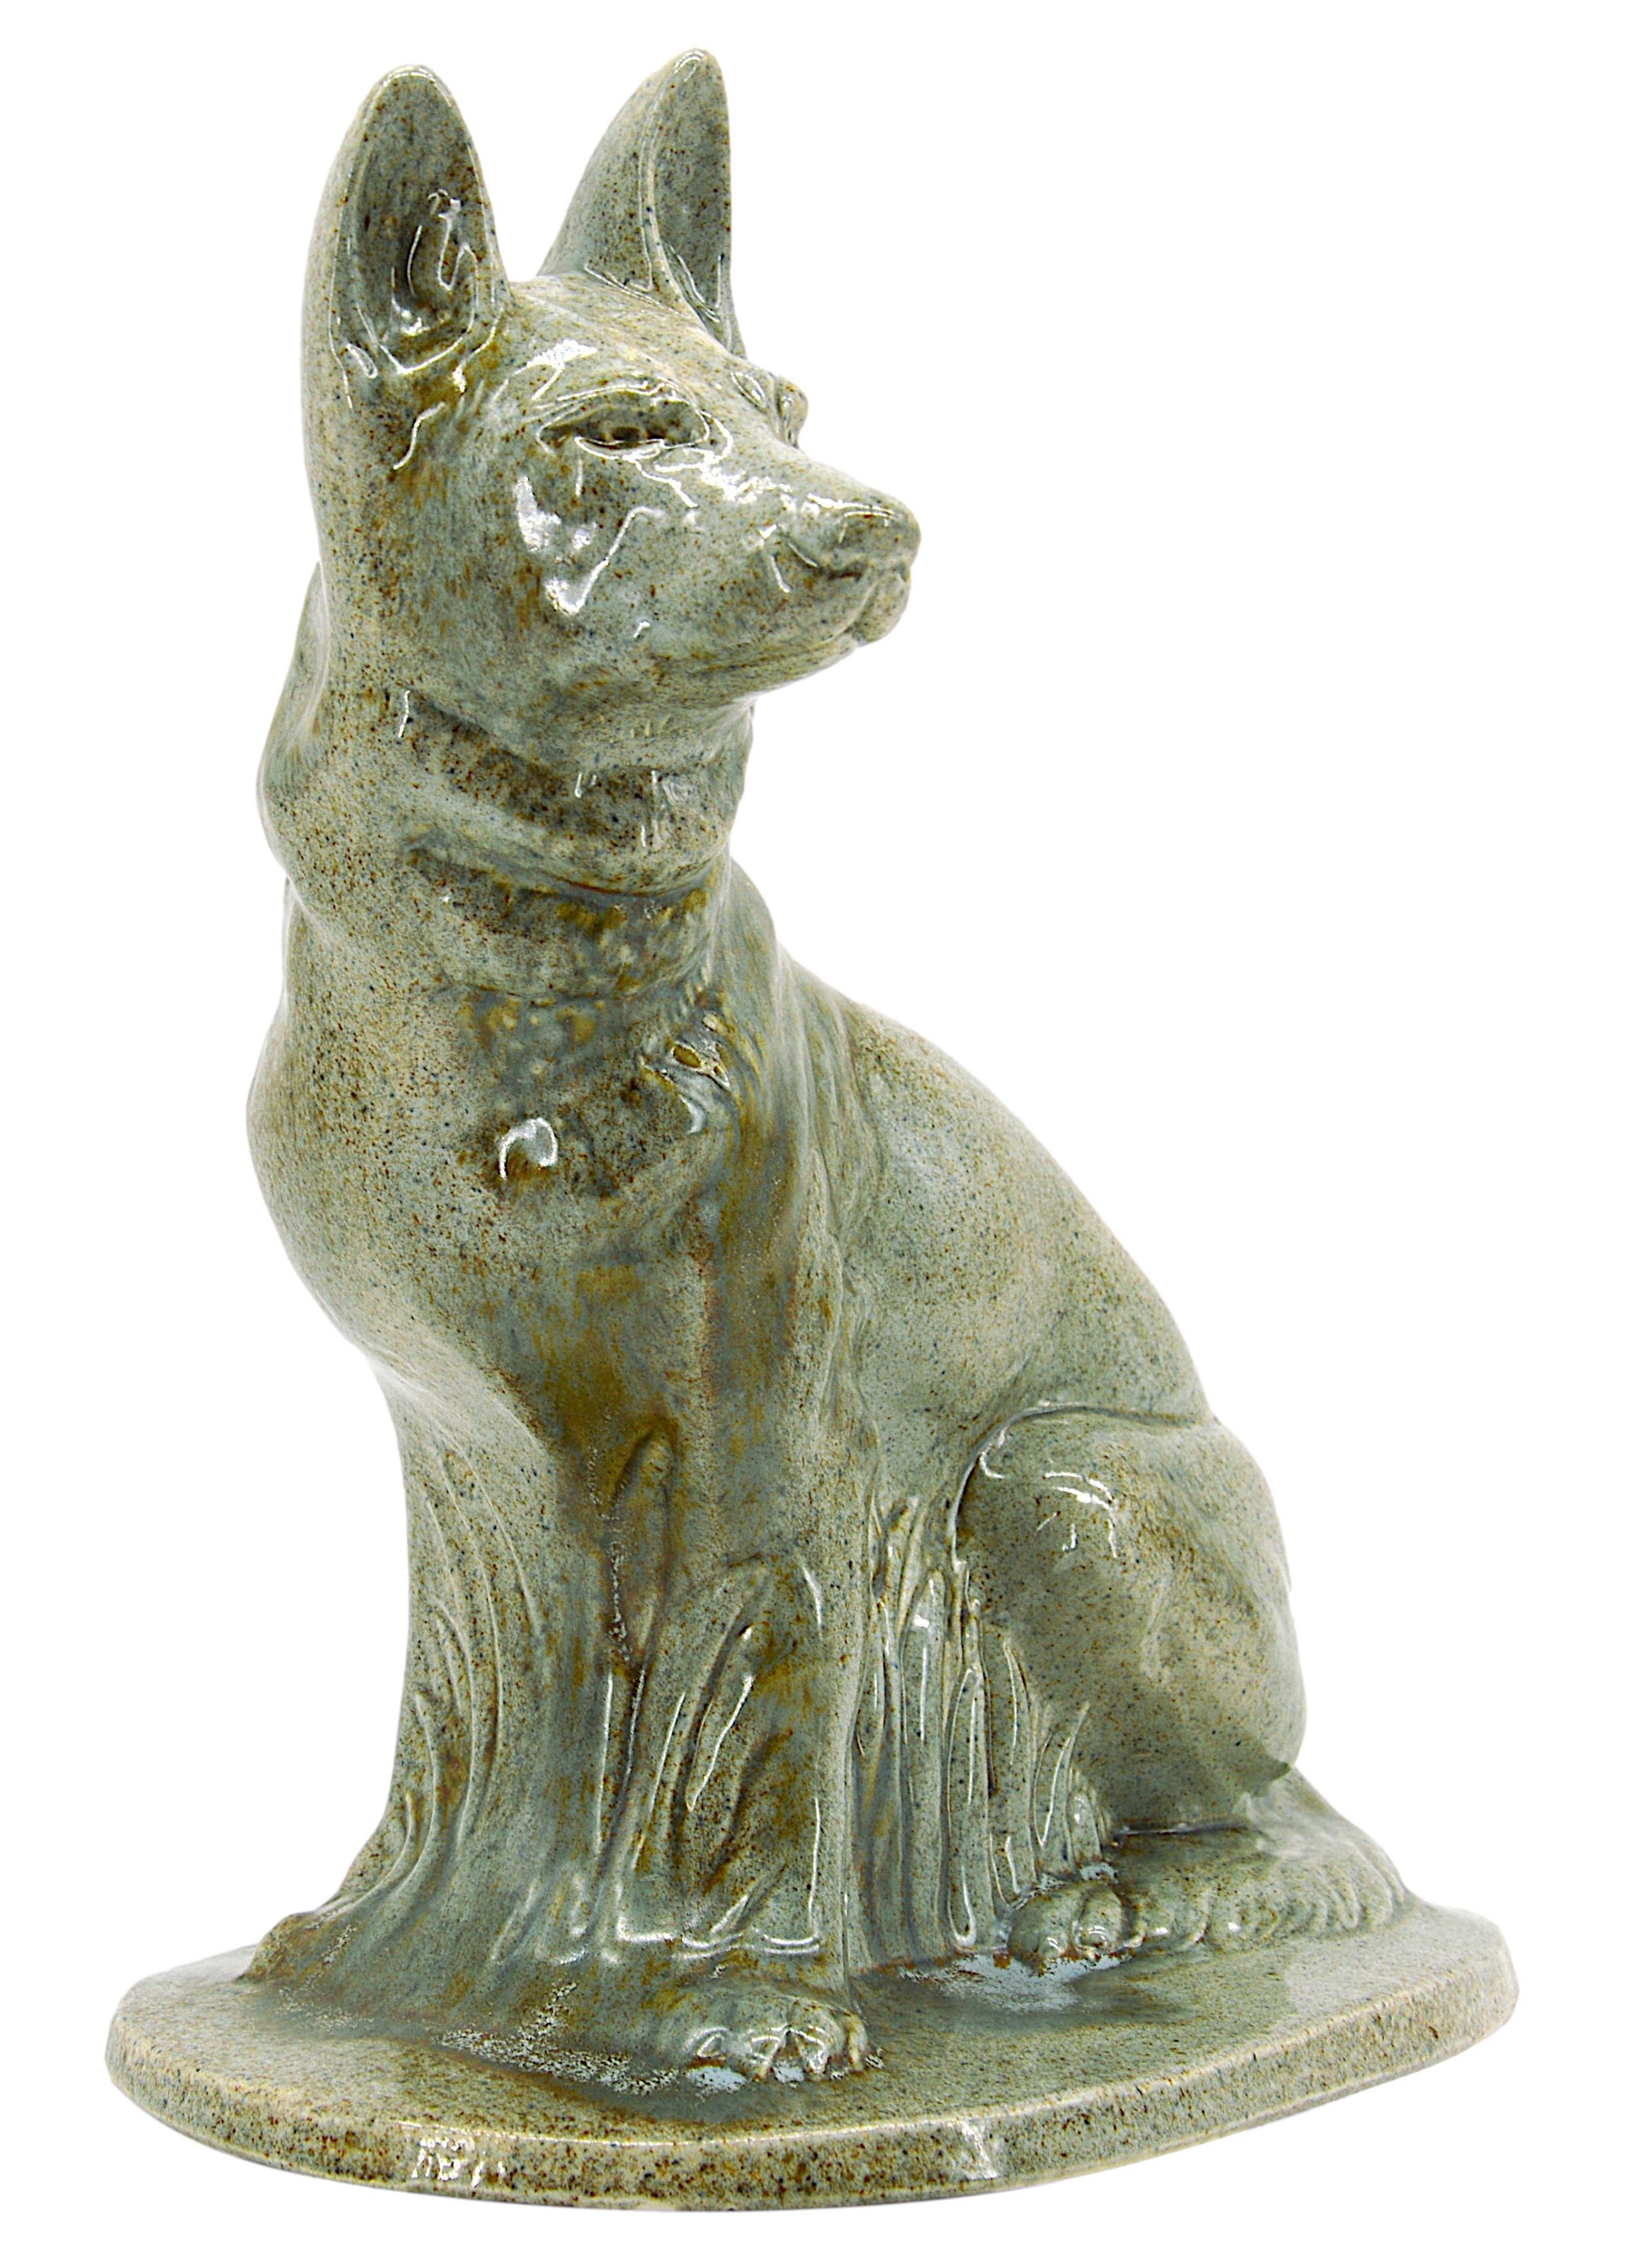 French Art Deco ceramic German shepherd statue by Moulin-des-Loups (Orchies), France, ca.1930. Measures: Height: 11.6